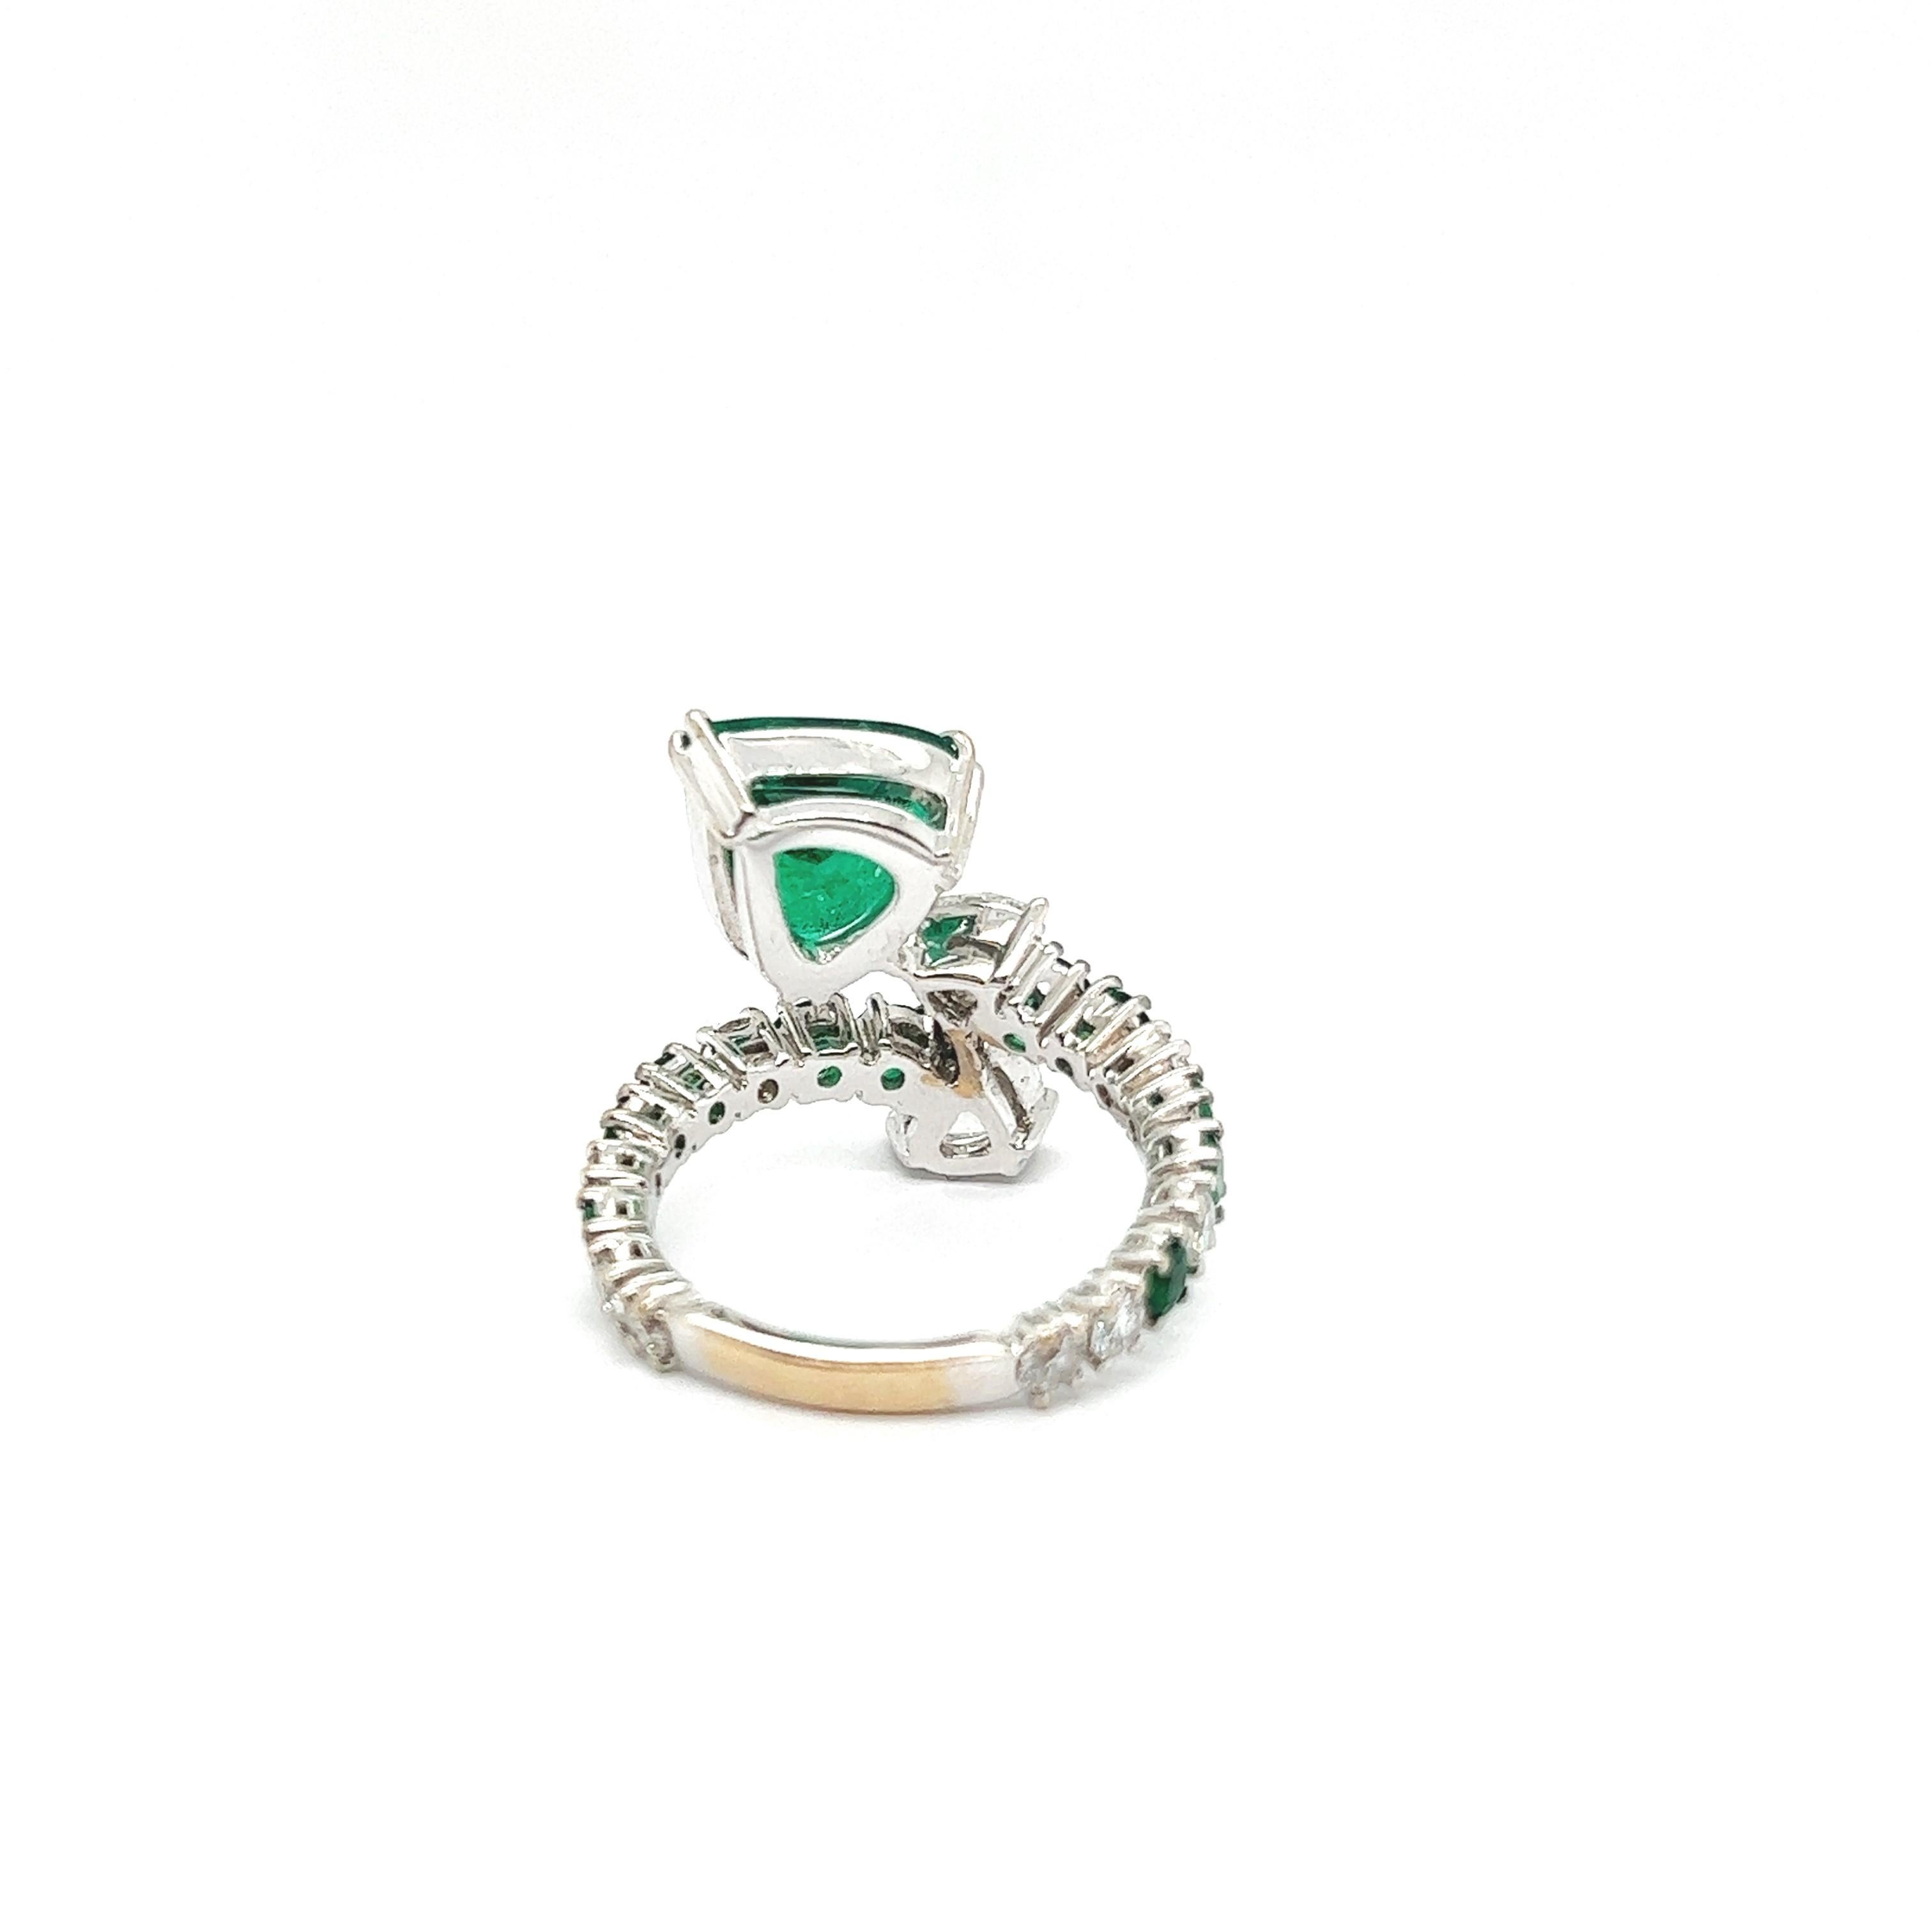 Gübelin Certified 4.20 Carat Emerald Ring with Diamonds in 18 Karat White Gold For Sale 6